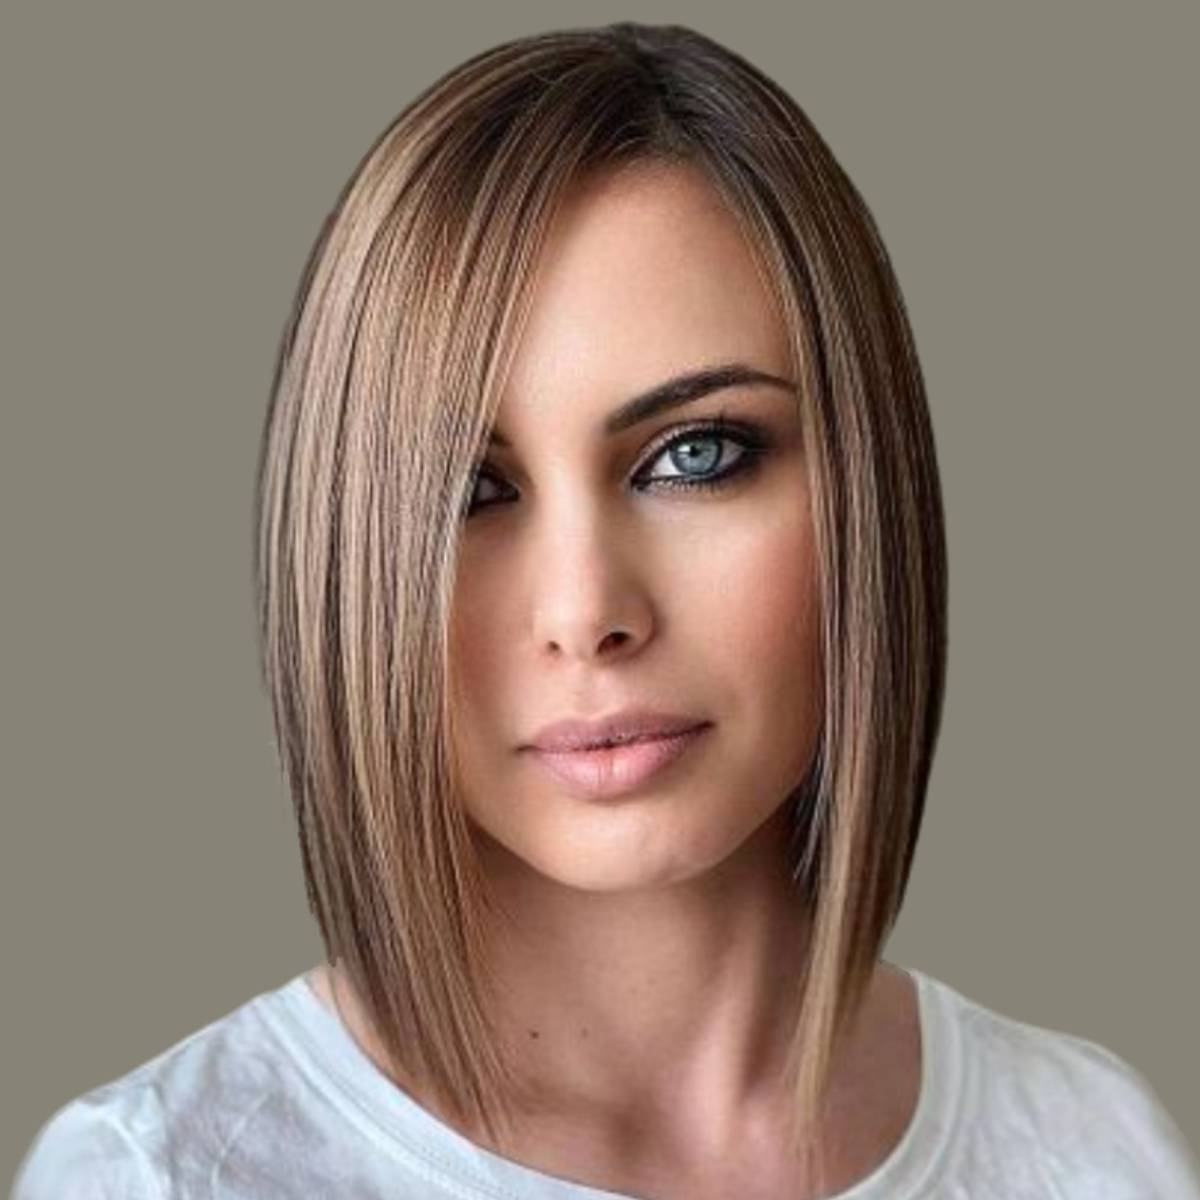 Mediumlength Blunt Cuts For Fine Hair: Ways To Add Volume And Texture ...